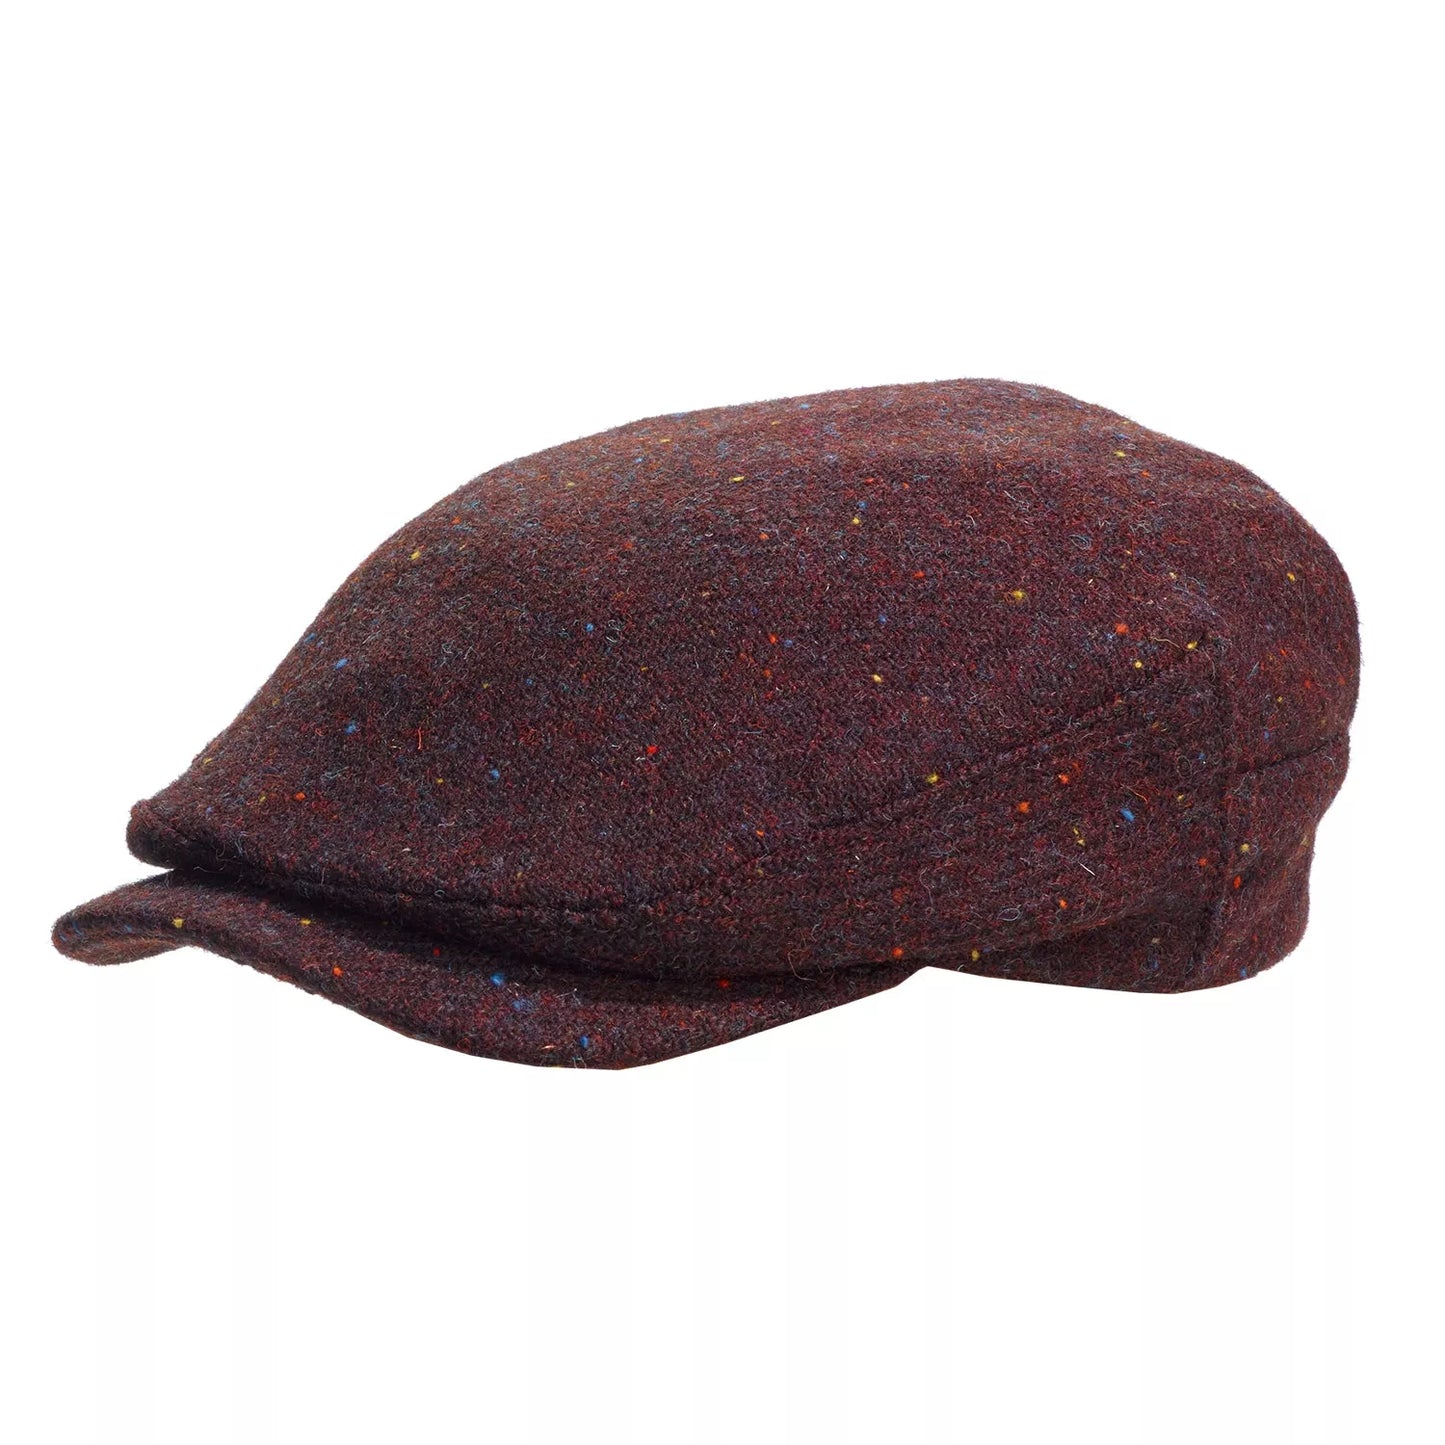 Timeless Style With The Speckled Harris Tweed Sicilian Flat Cap | Laird ...